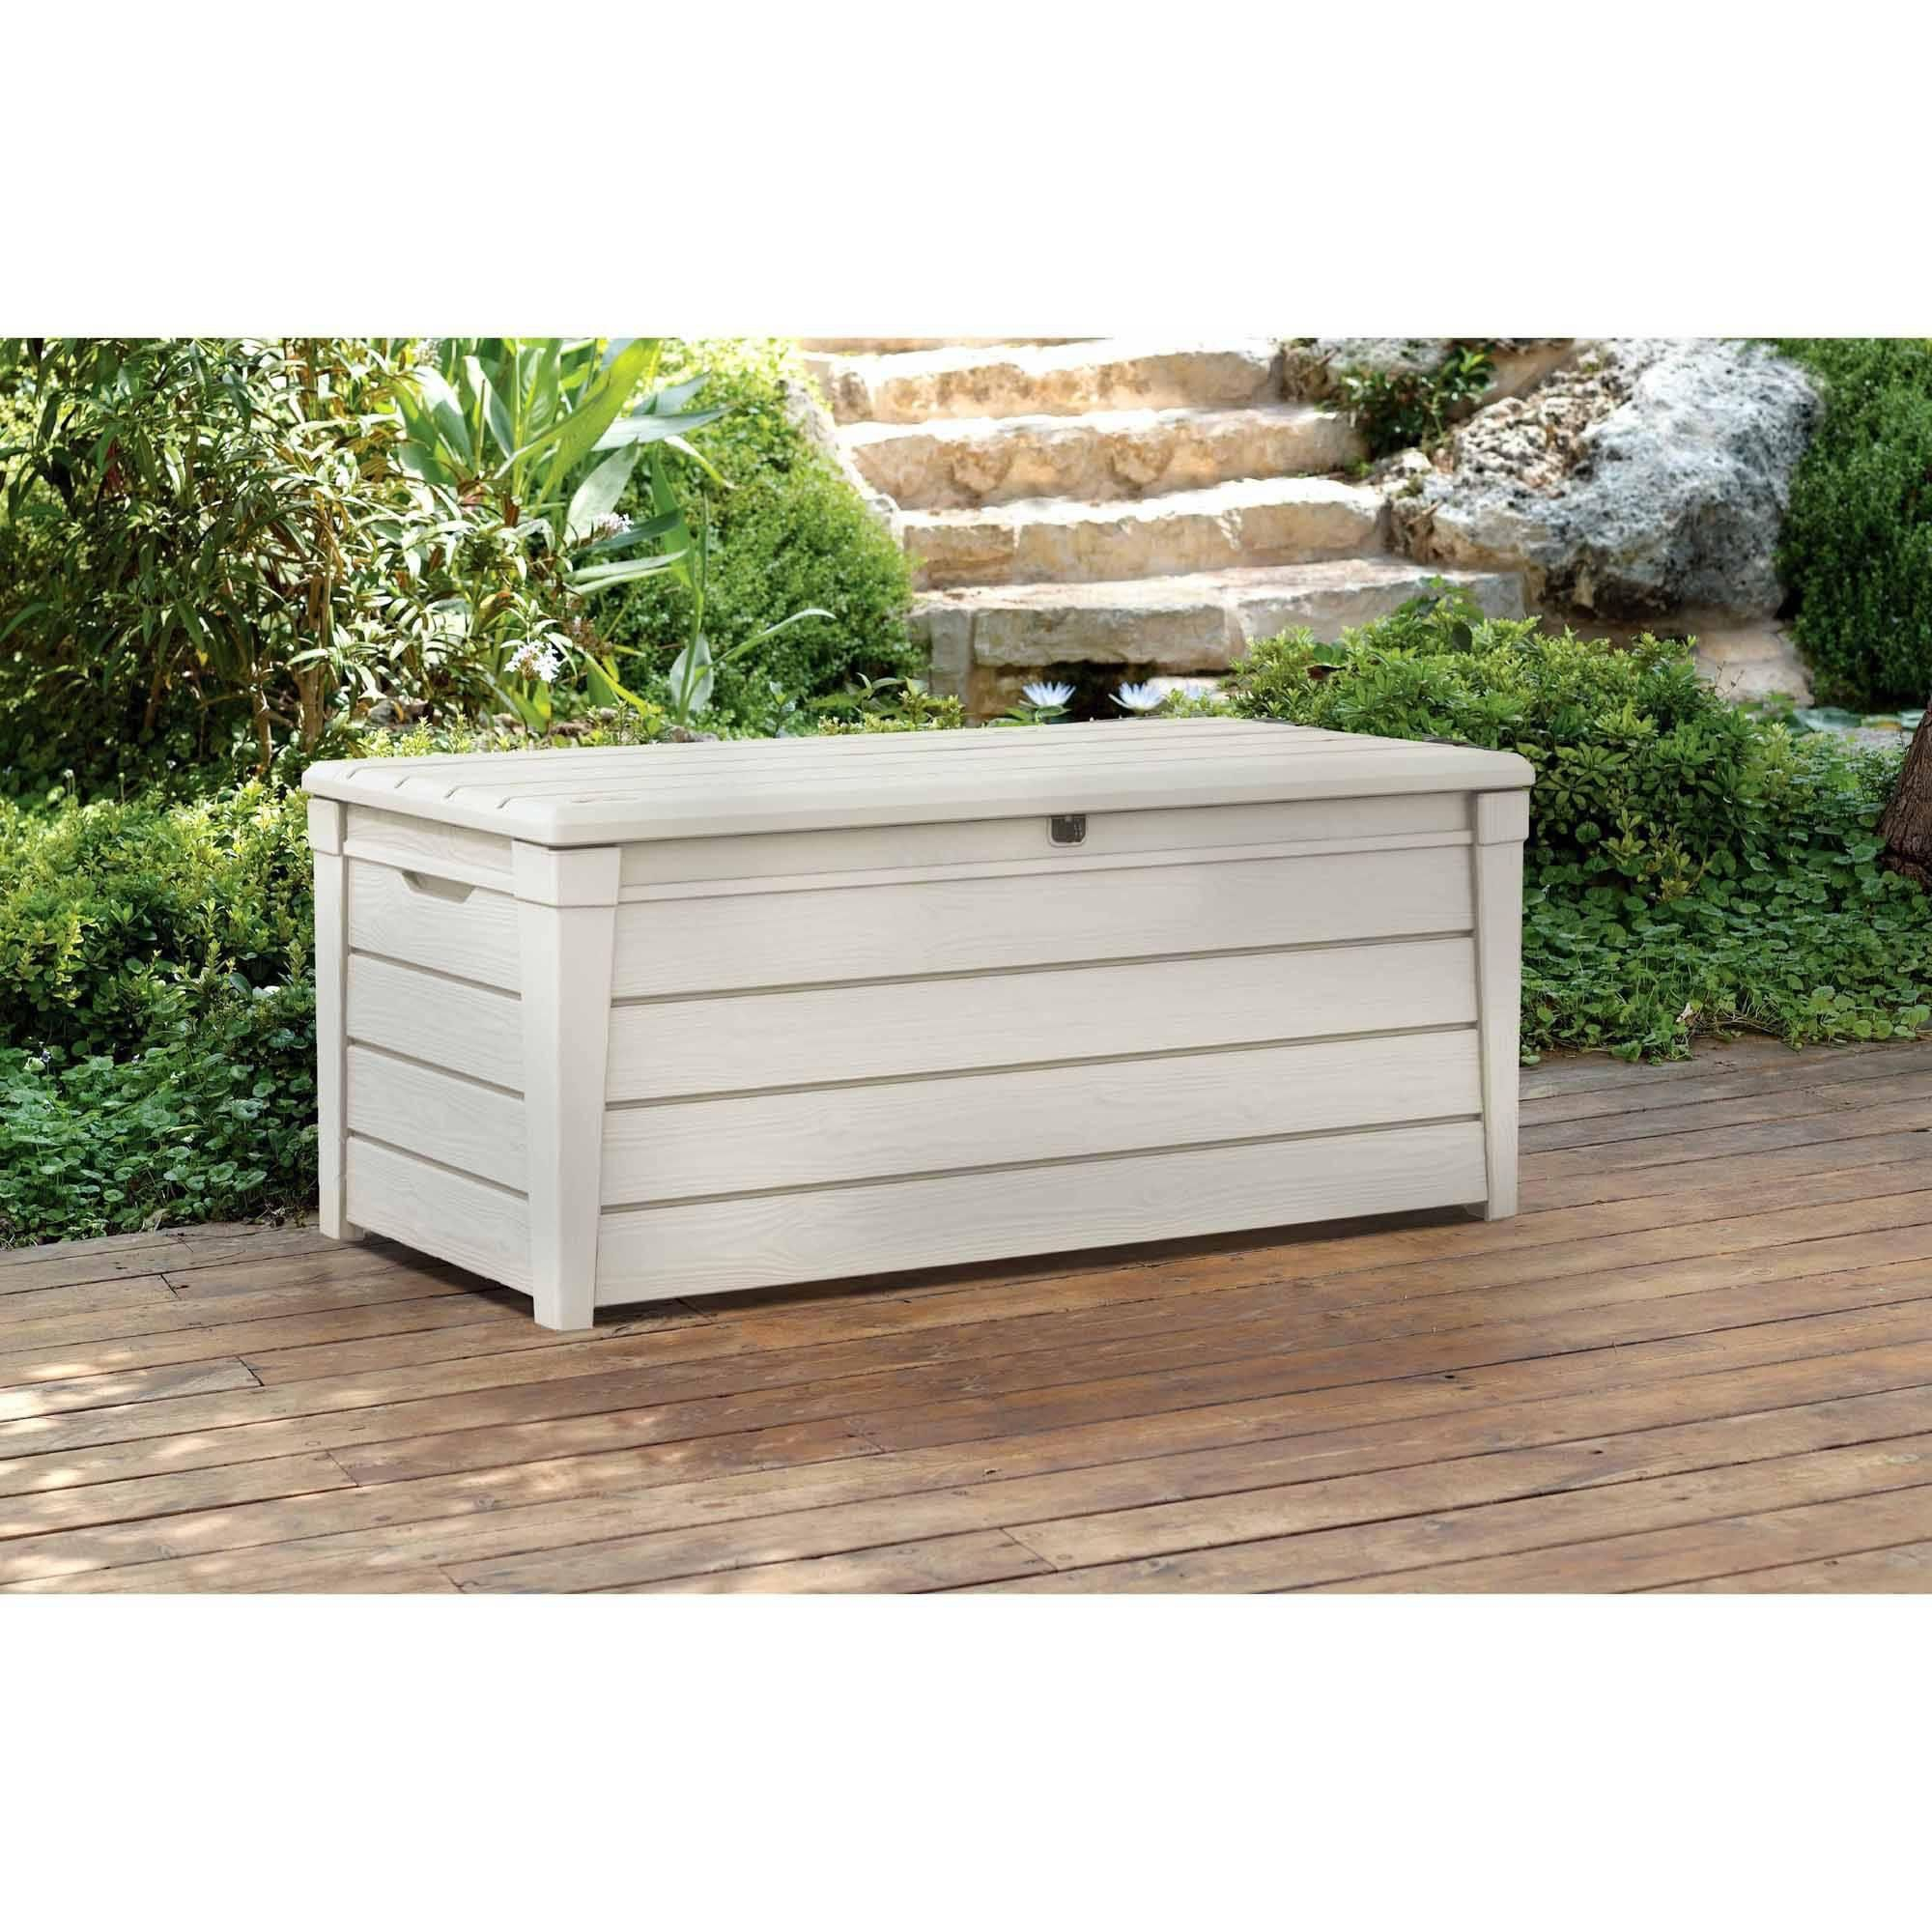 Keter Brightwood Outdoor Plastic Deck Storage Container Box 120 Gal throughout sizing 2000 X 2000